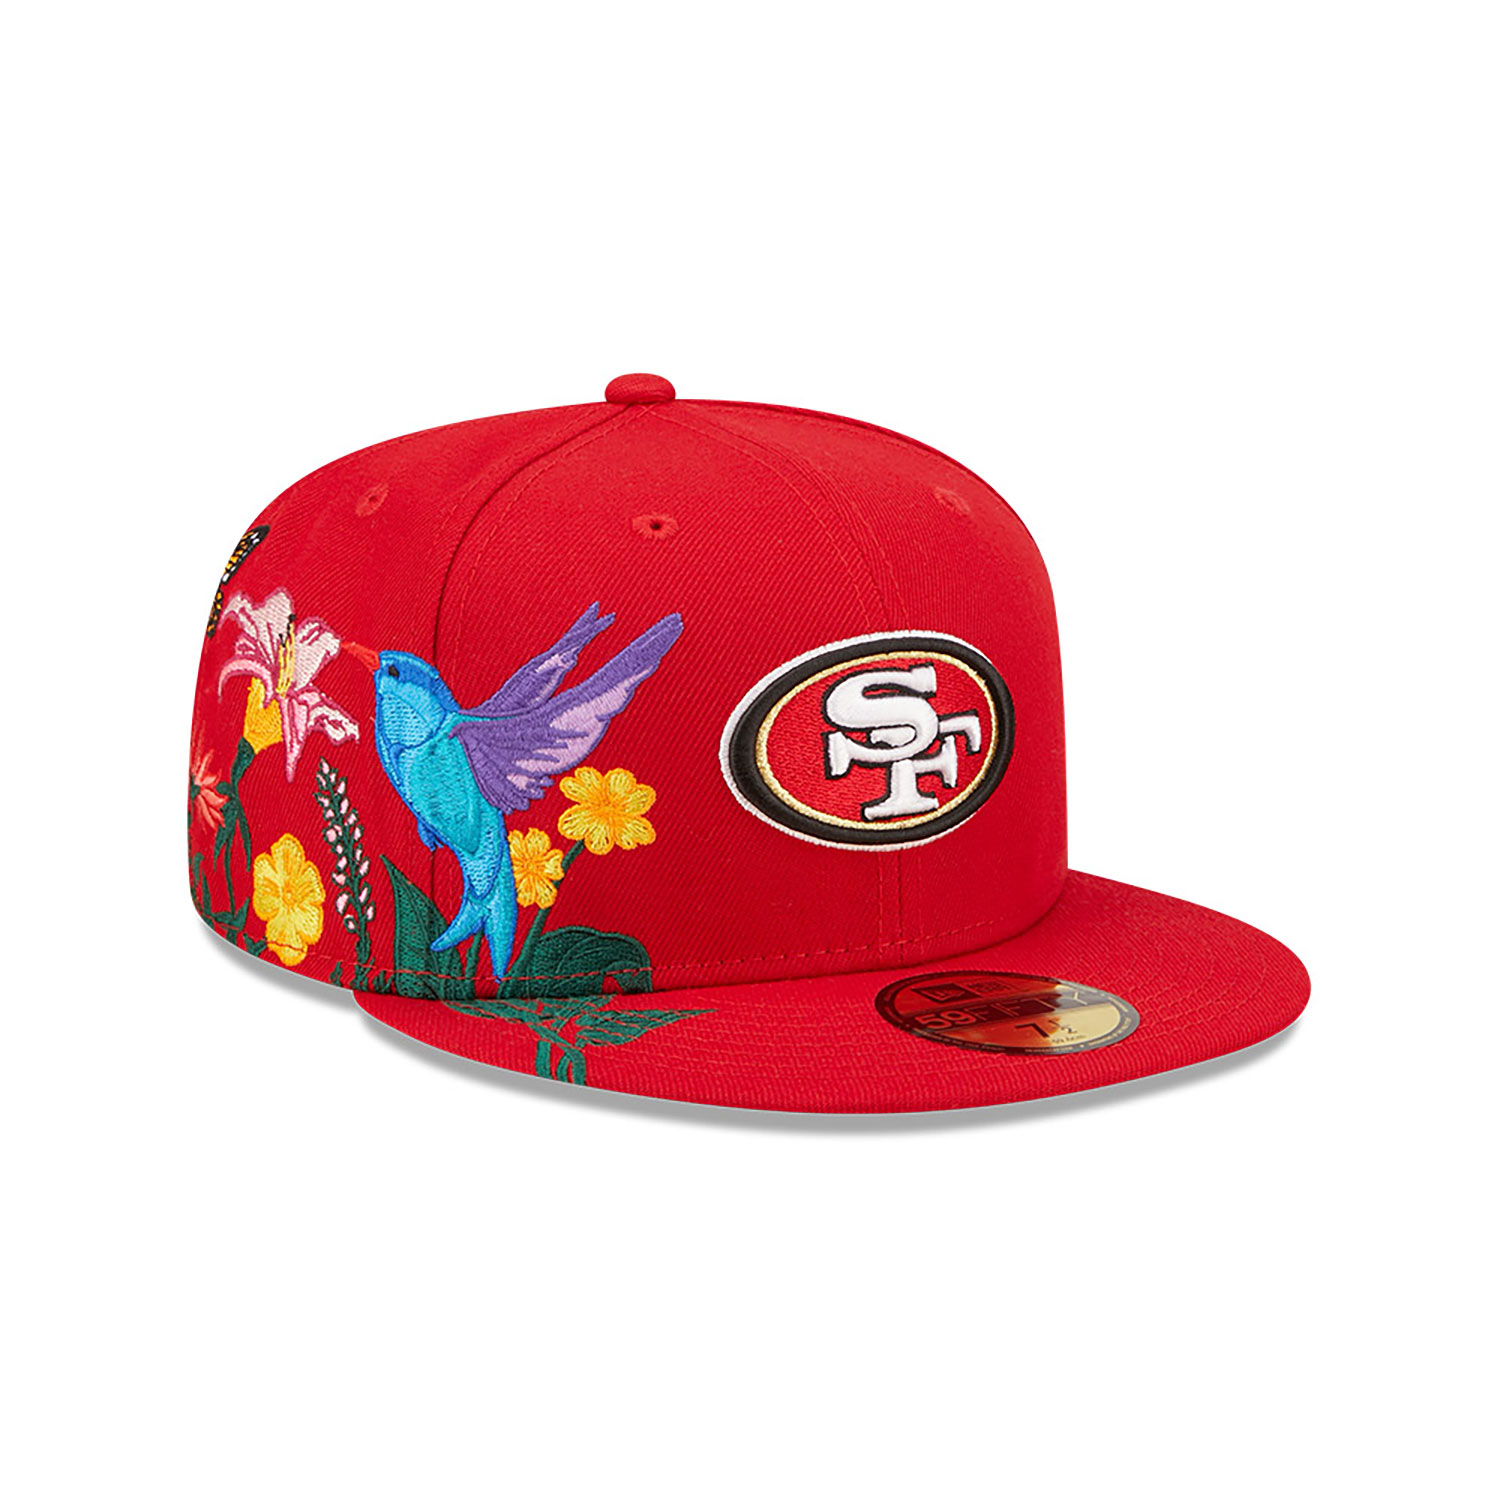 https://www.neweracap.co.uk/globalassets/products/b4982_b95/60243436/san-francisco-49ers-nfl-blooming-red-59fifty-fitted-cap-60243436-left.jpg